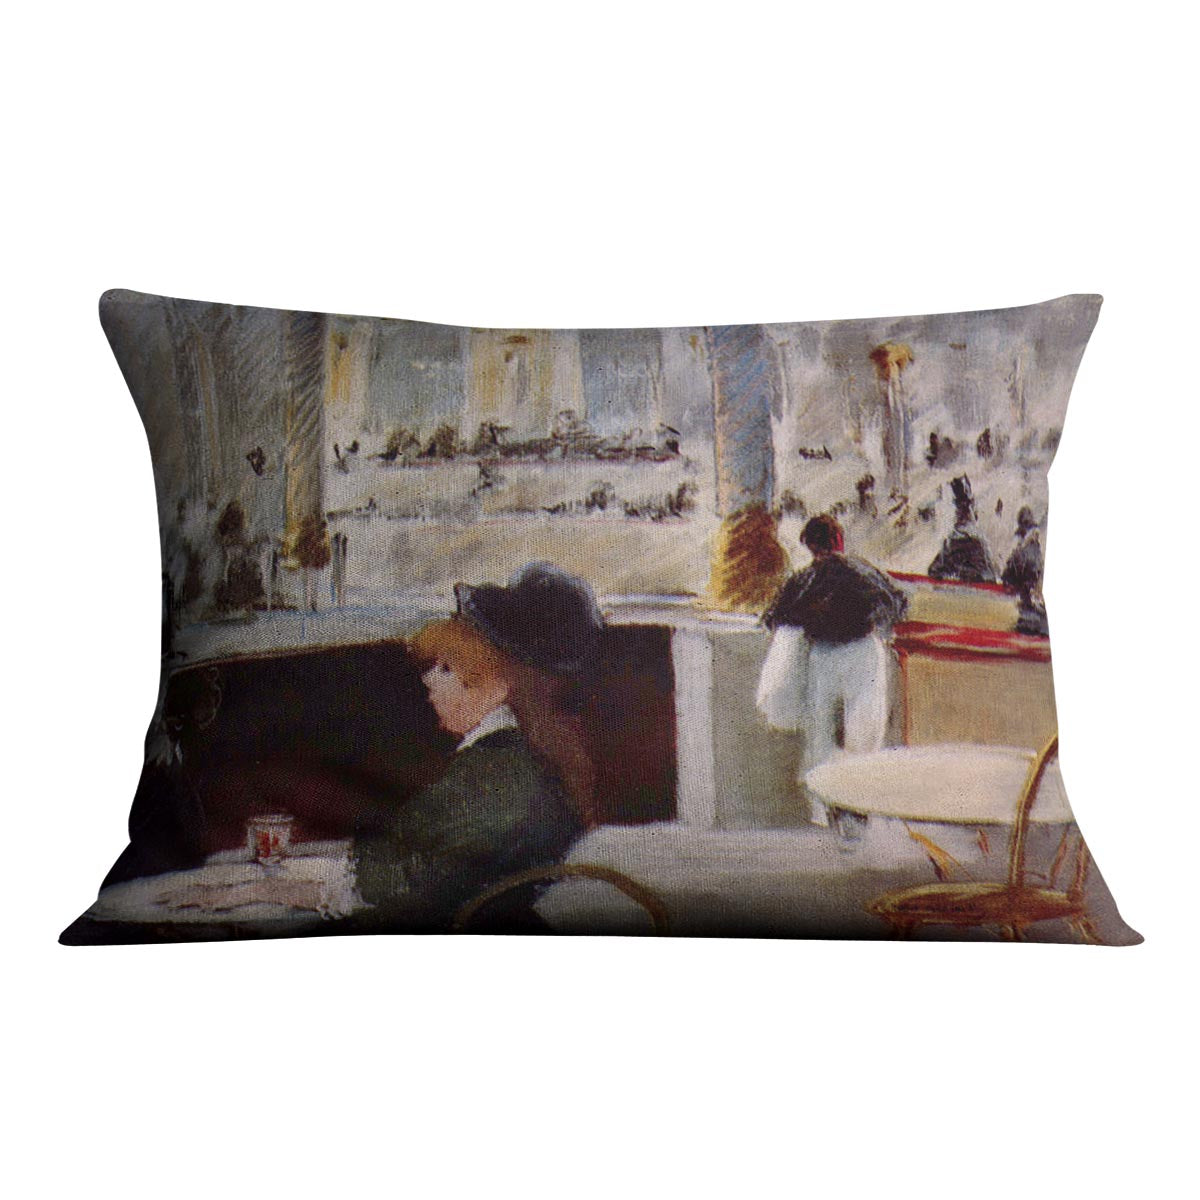 In Cafe 1 by Manet Cushion